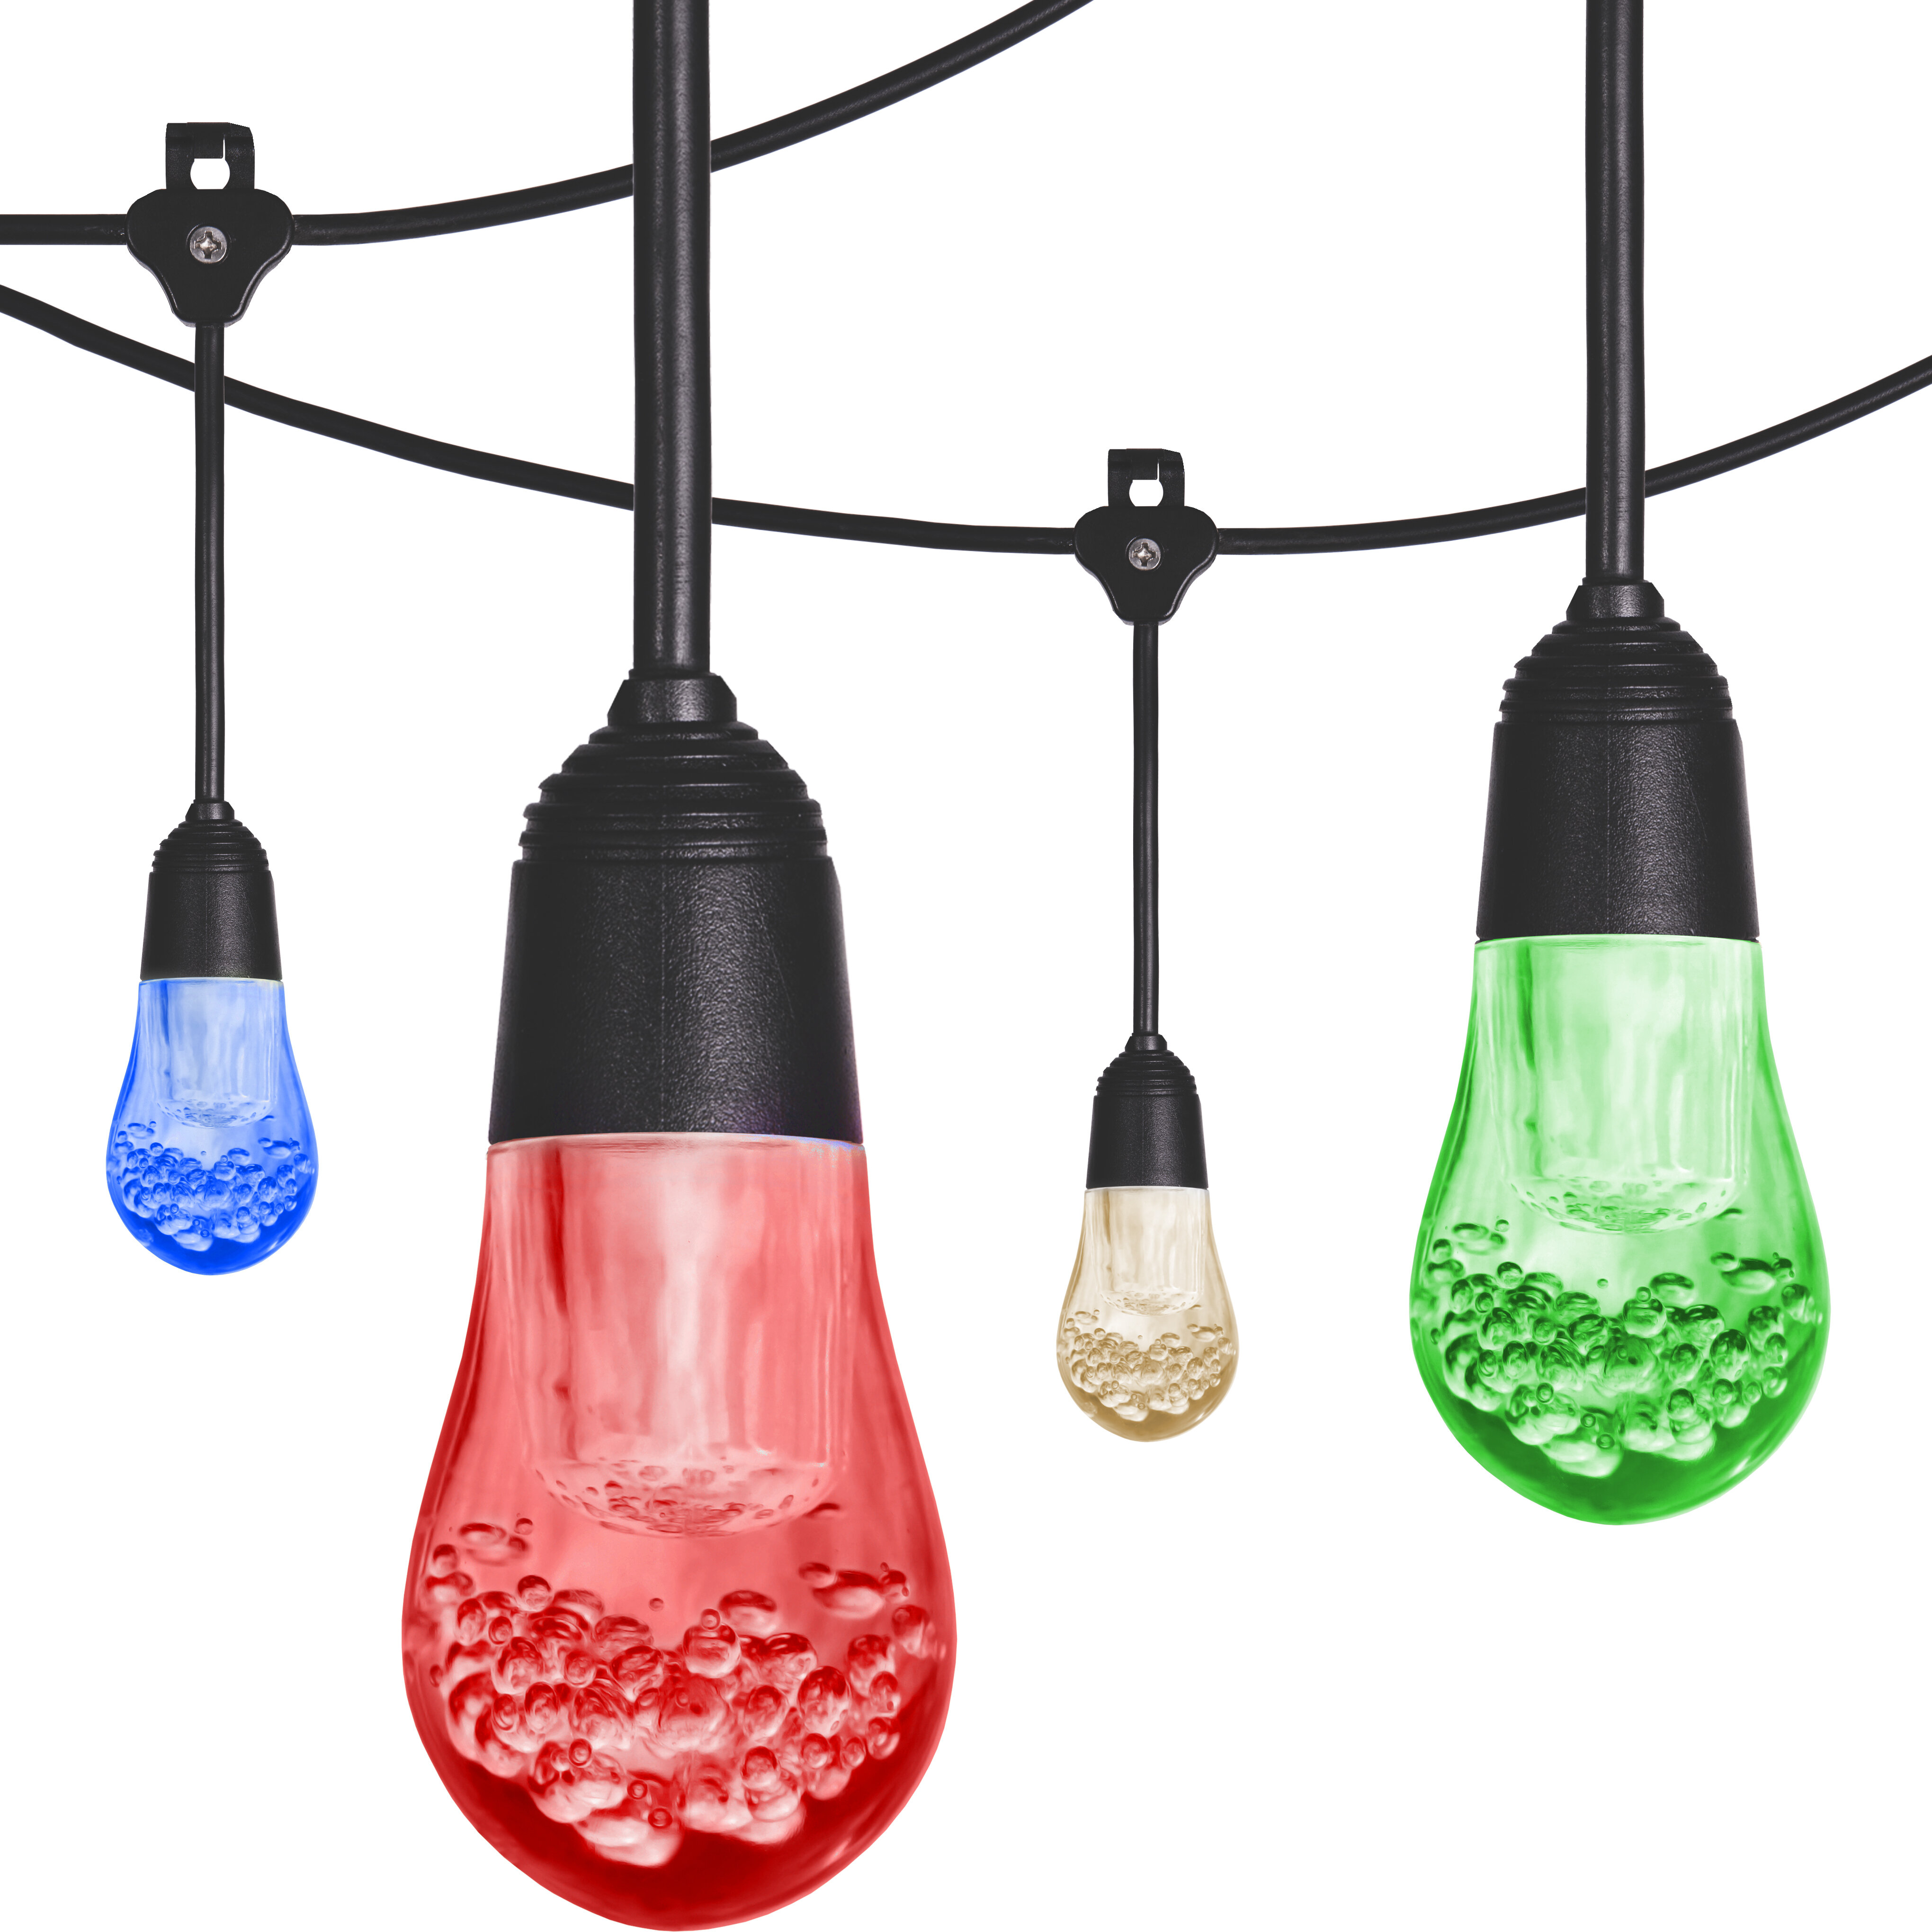 Enbrighten Weather Resistant Dimmable LED Lantern with USB Charging, Red